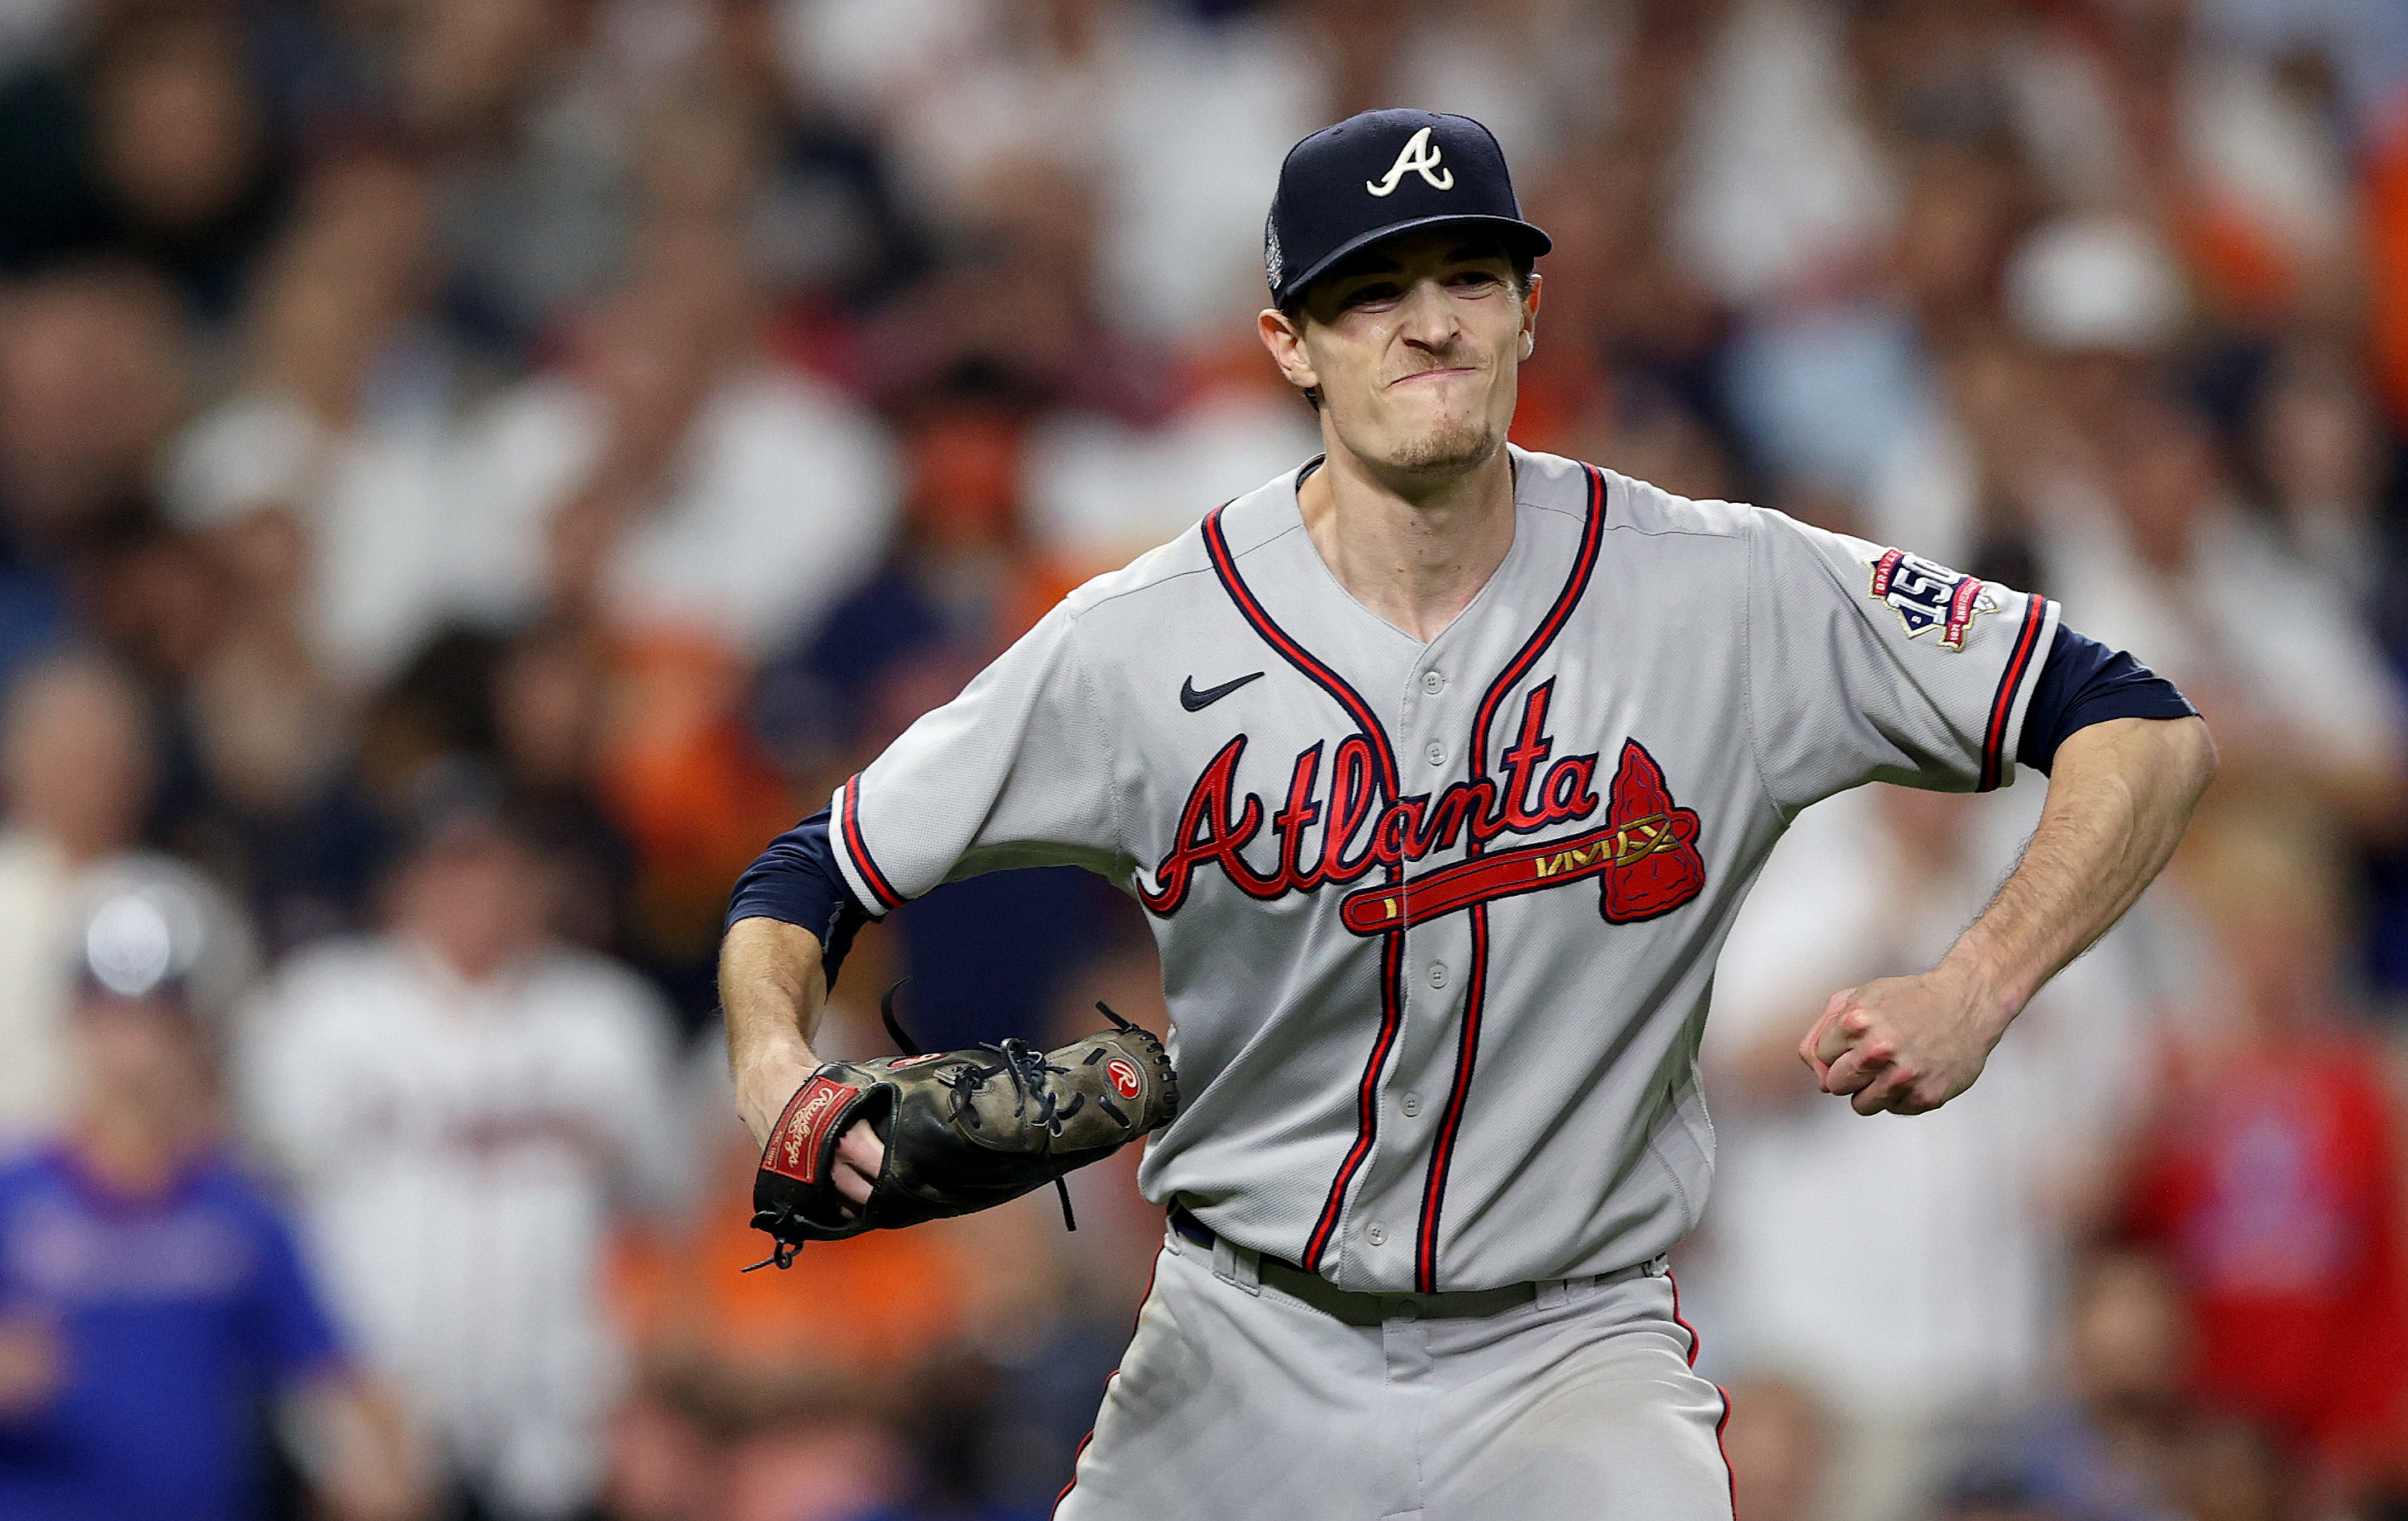 Atlanta Braves World Series champions for first time since 1995